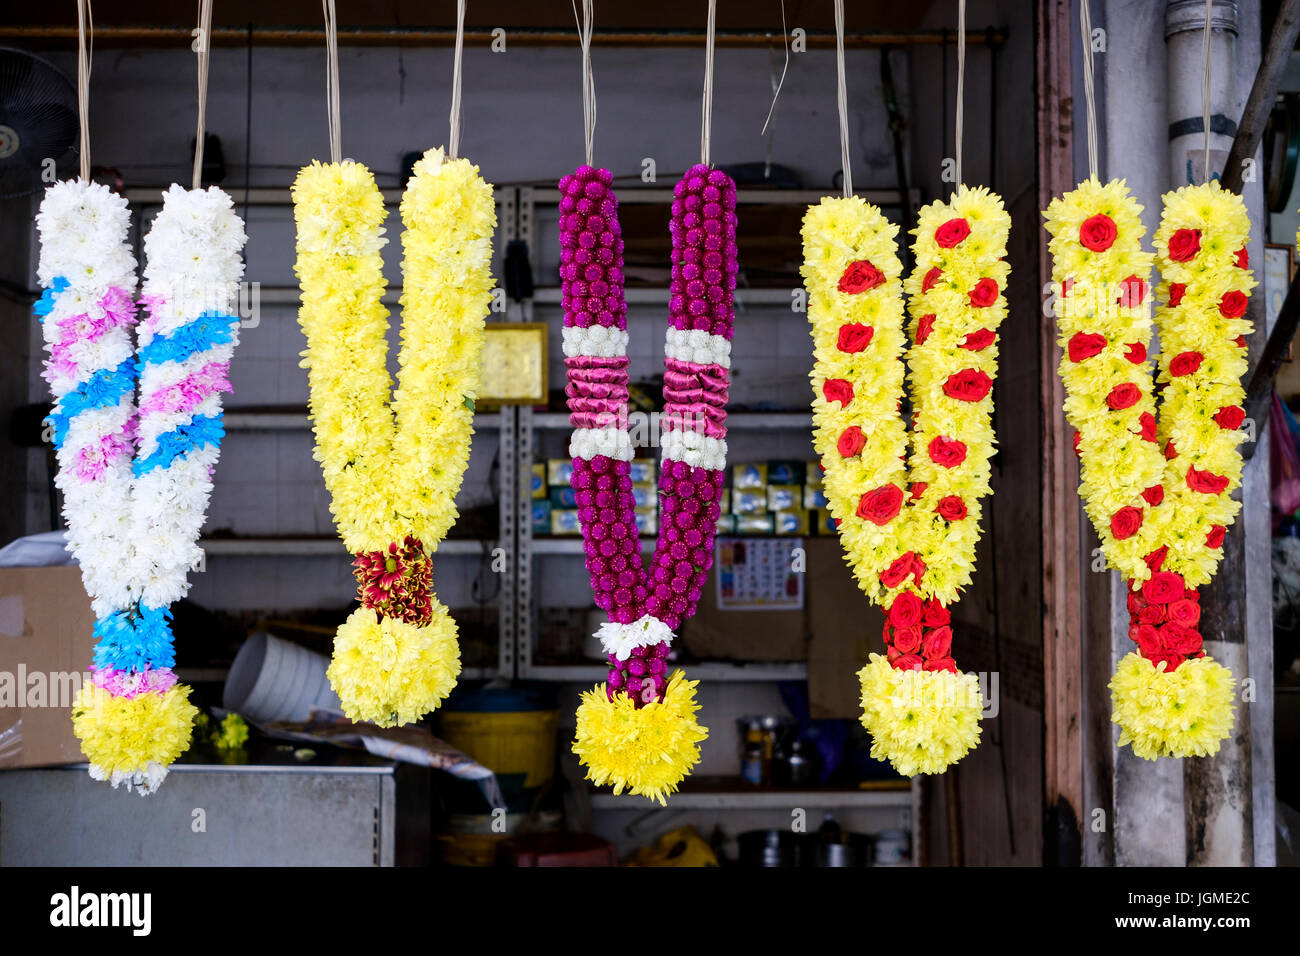 Flower garlands for sale as offerings on a street stall just off Little India, Jalan Masjid Kapitan Keling, George Town, Pulau Pinang, Malaysia. Stock Photo